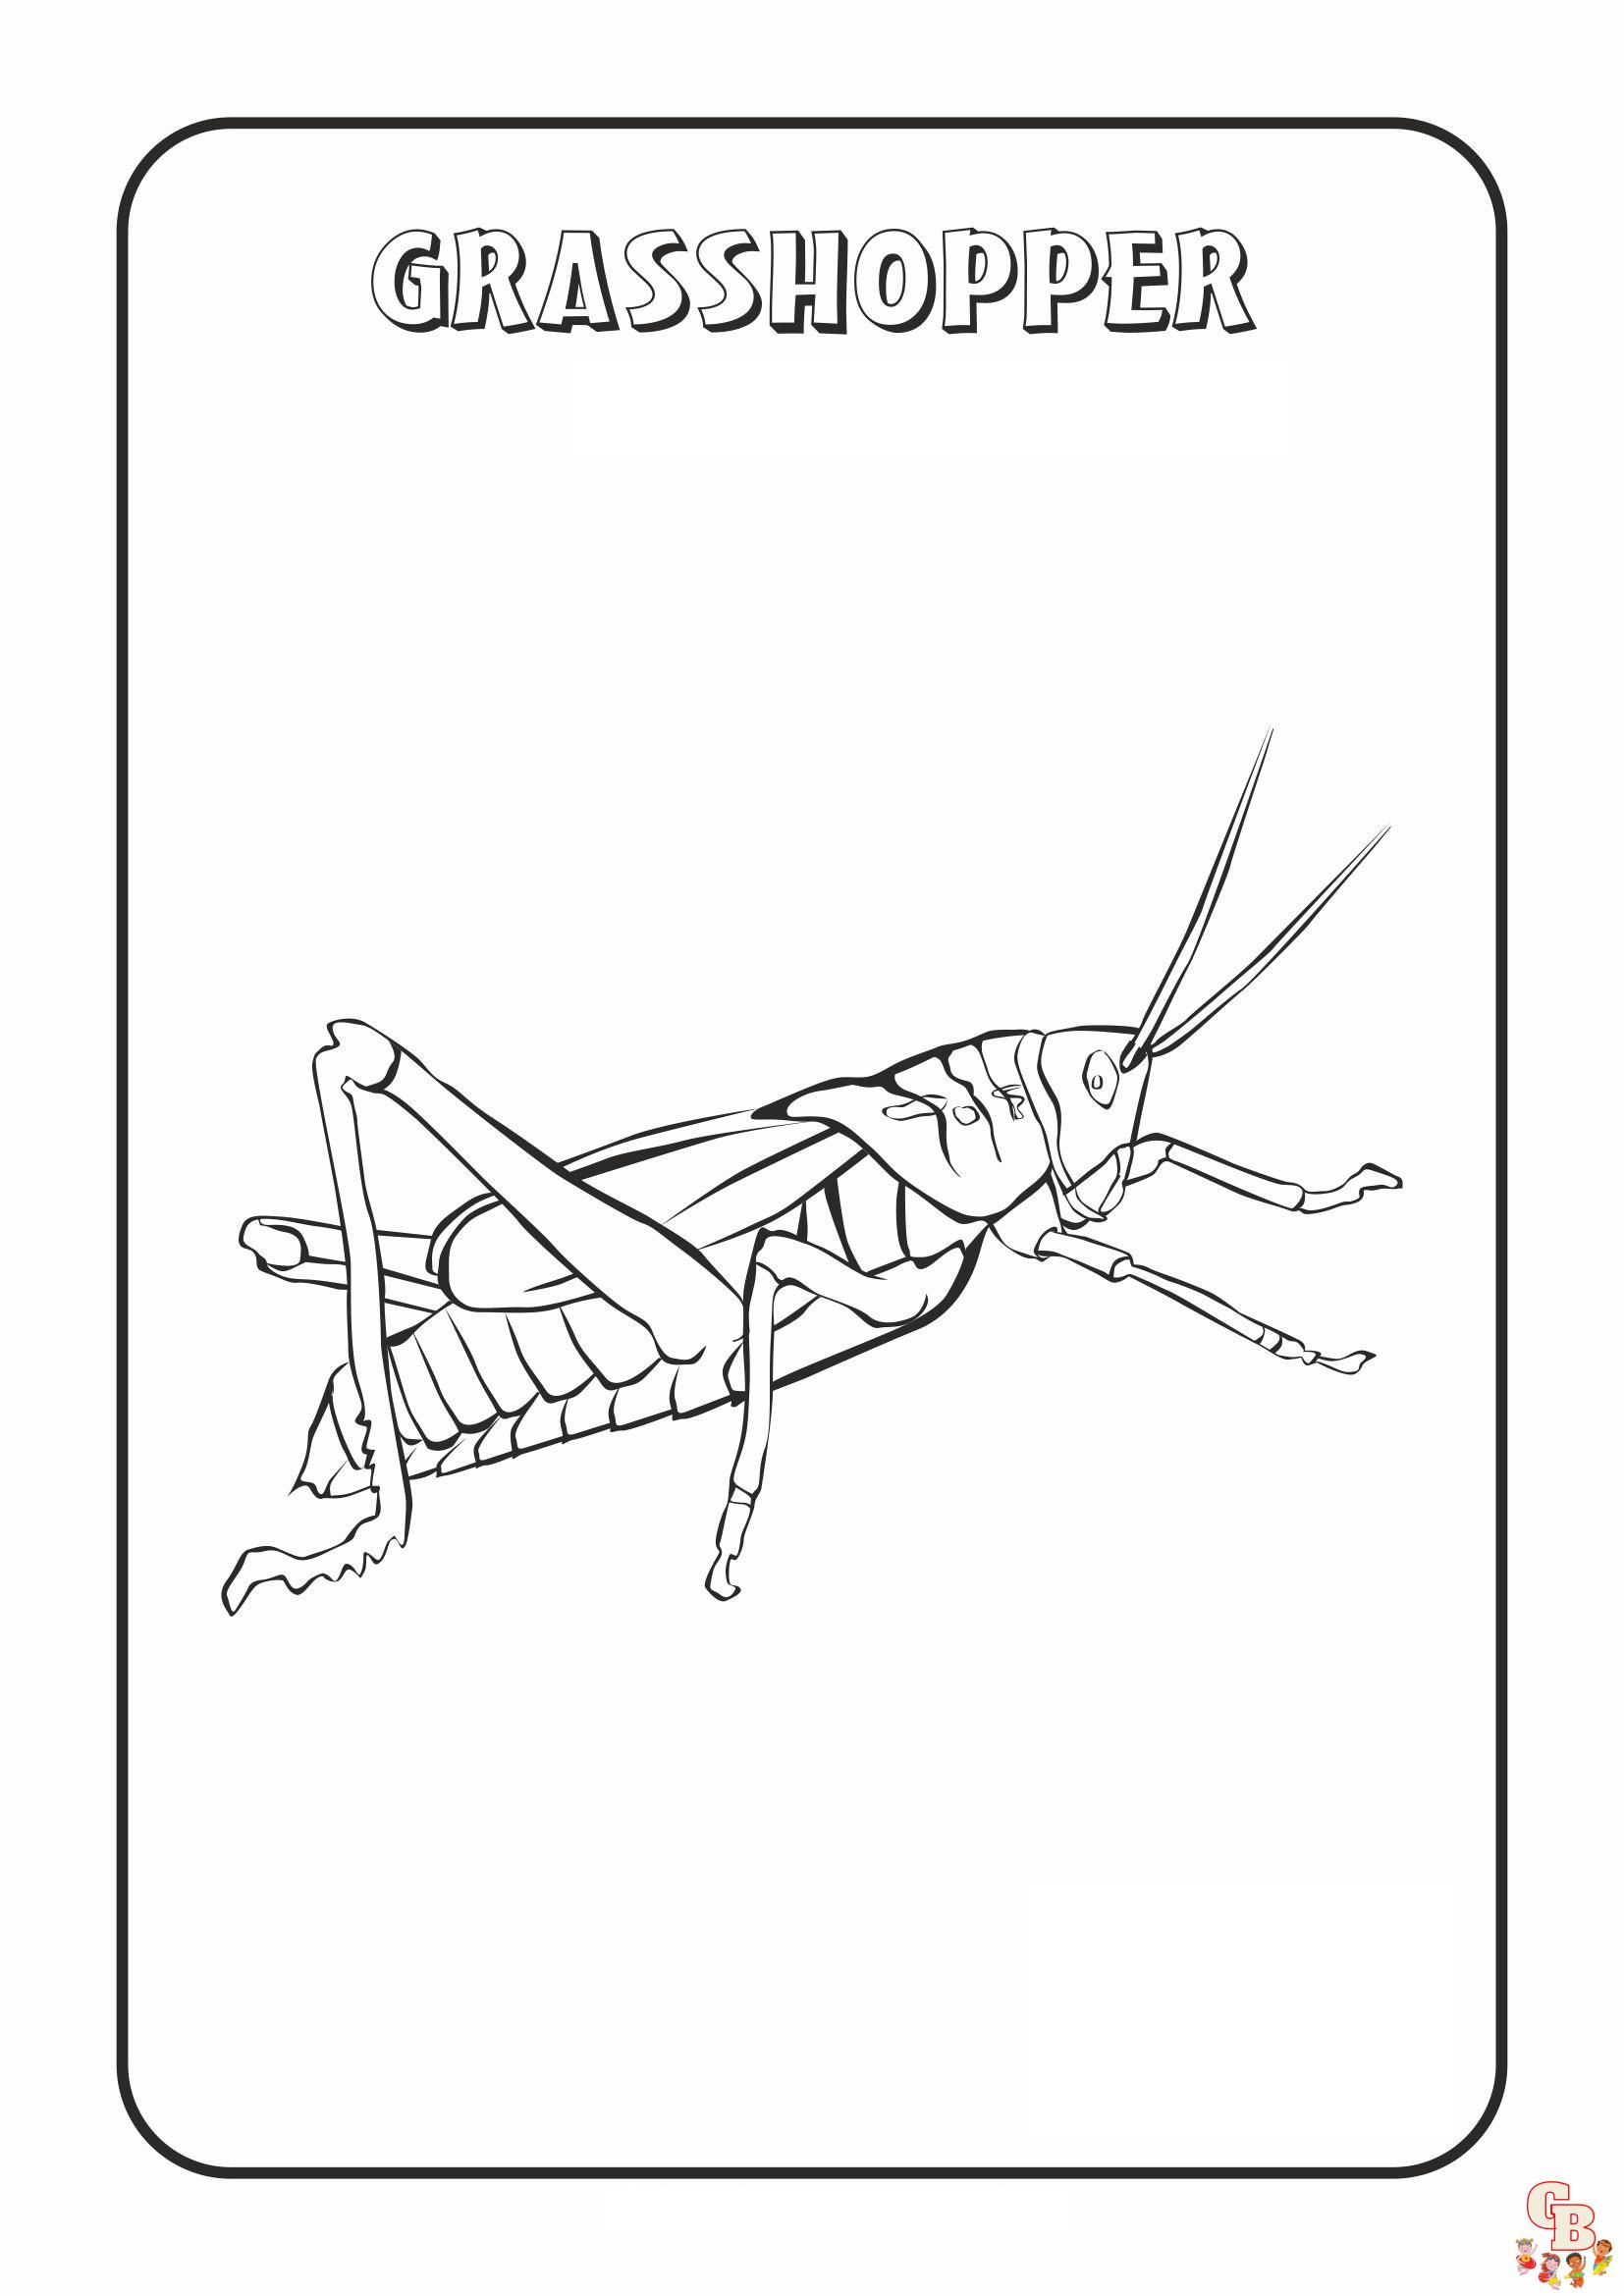 Grasshopper Coloring Pages 4